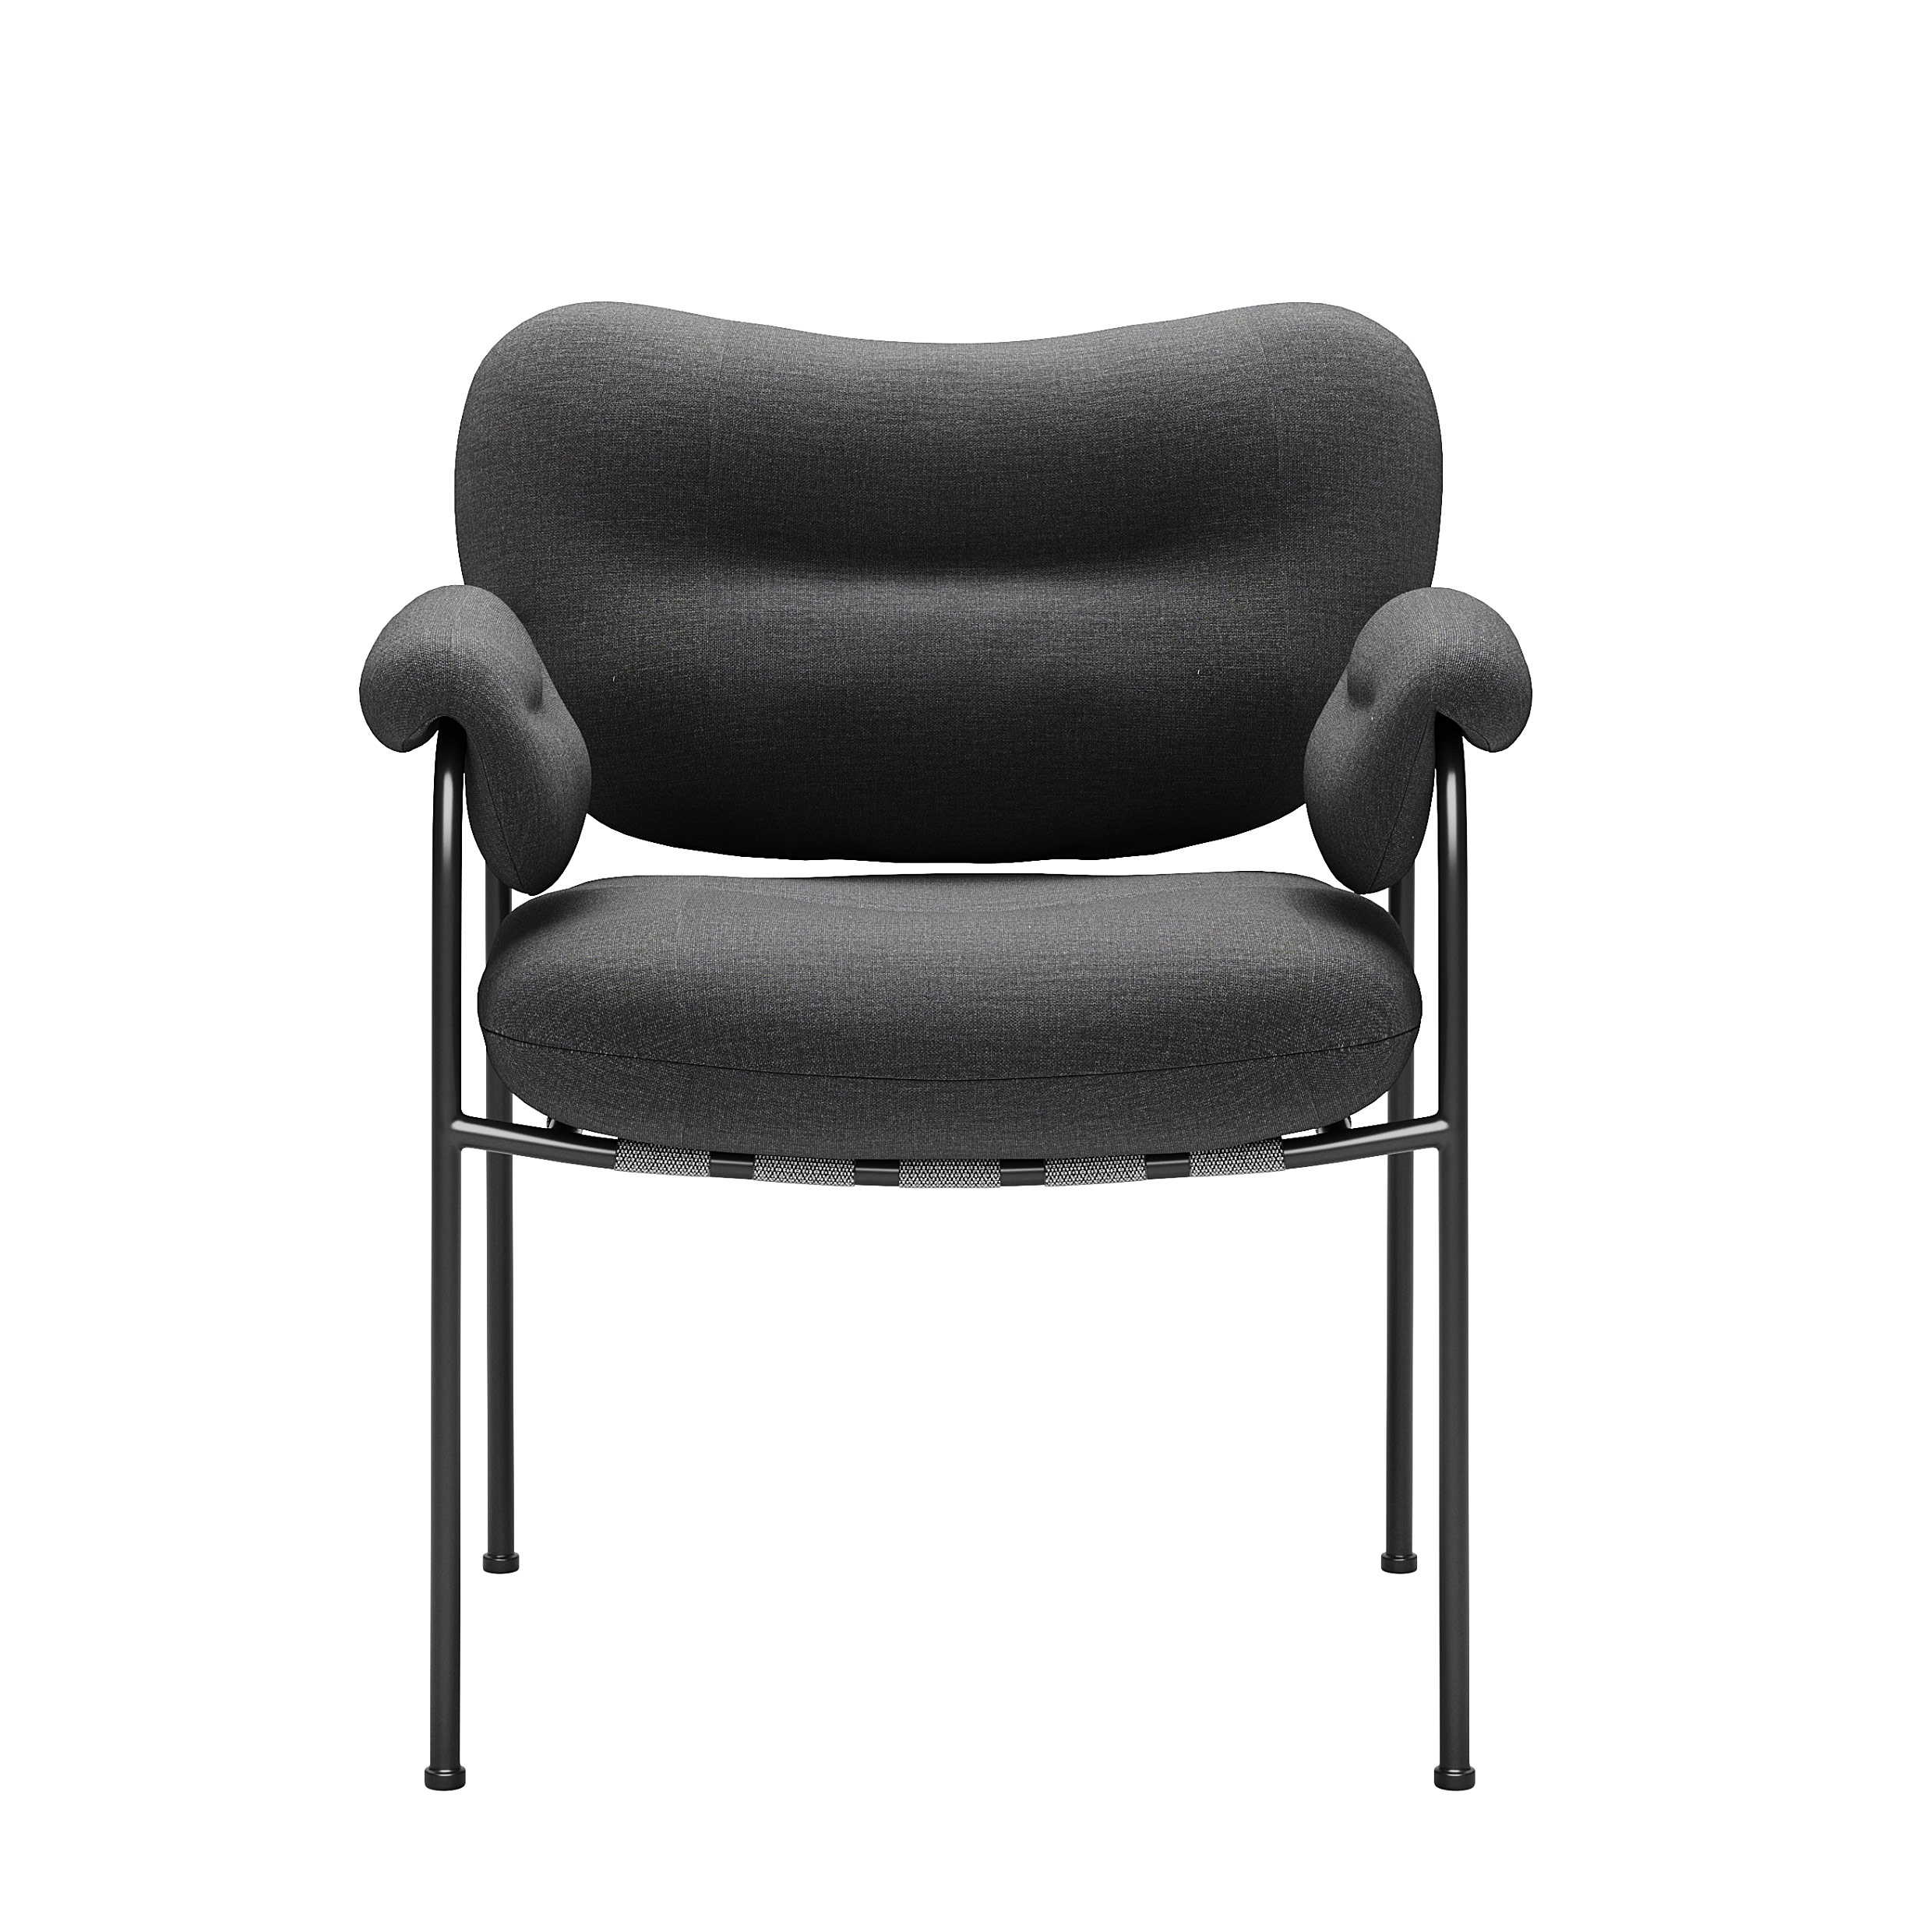 FOGIA // SPISOLINI DINING CHAIR  - DINING CHAIR | SCHWARZ